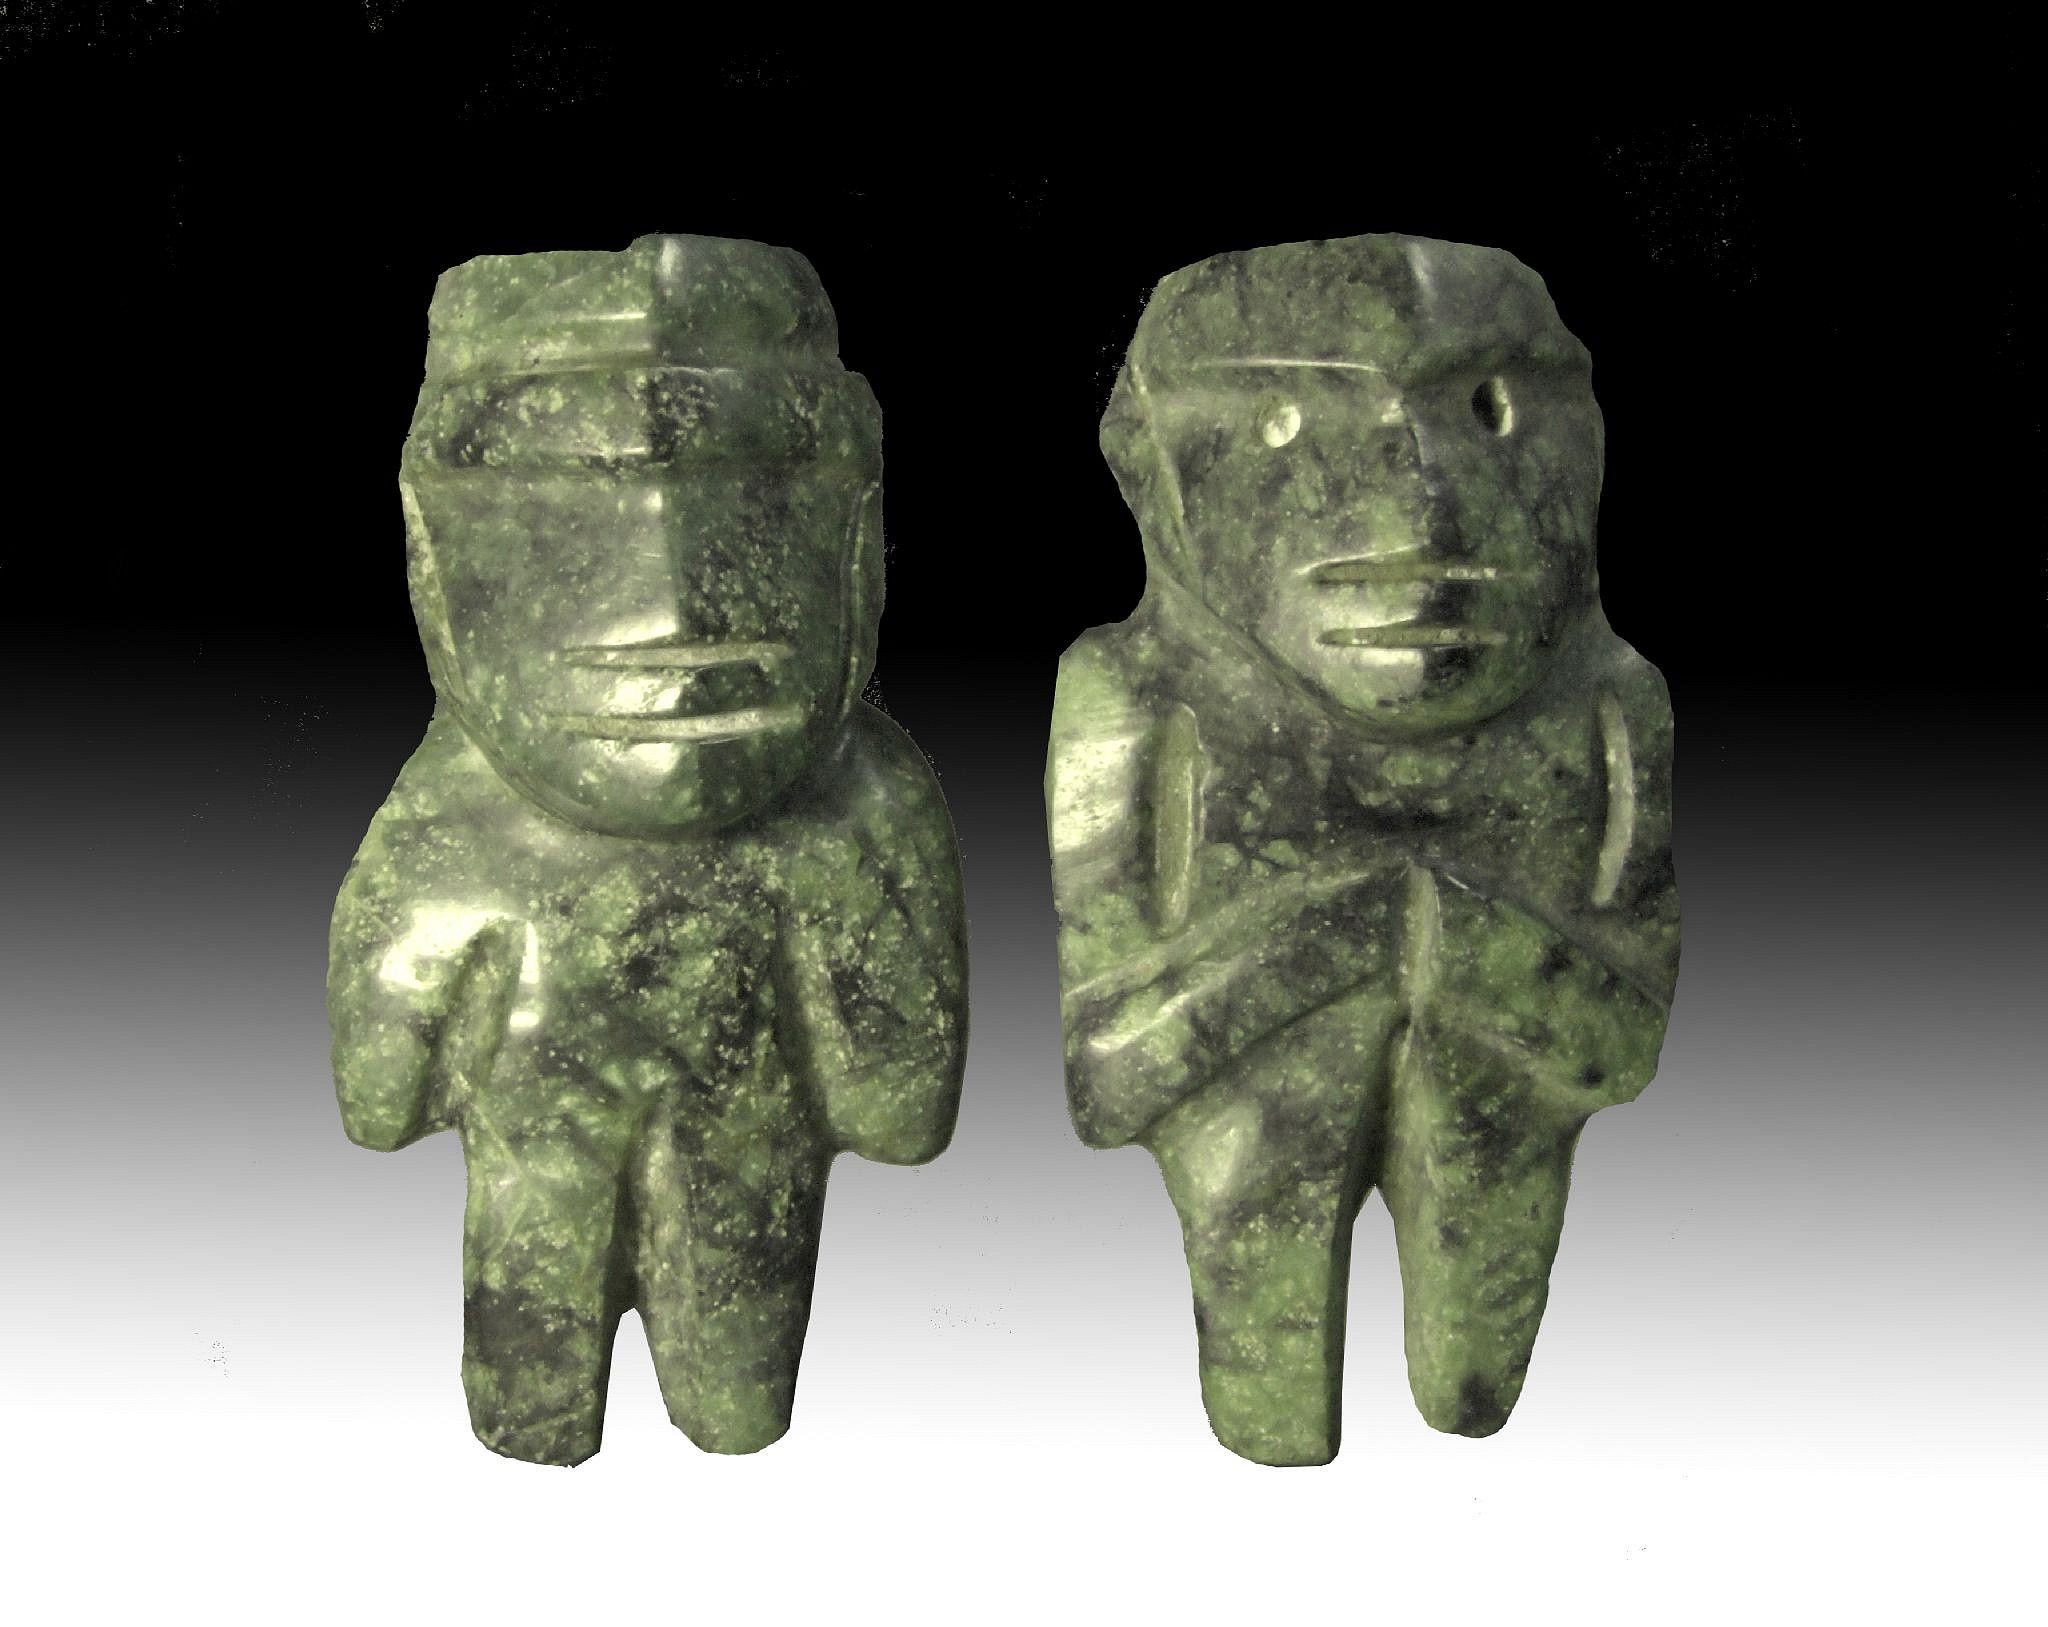 Mexico, Pair of Miniature Dark Green Jadite Mezcala Figures of the M16 Type
These miniature dark green jadite figures, male and female, bear serene facial expressions and body language.  The figures were created using the string-sawing technique and are made of an extremely smooth and dark jadite native to South America, characterized by a network of deep green and blue-black veins.  The figures have complex faces and arms that stand out in relief, which makes them category Type M16  Mezcalas.  The representation of human figures played an important role in Mezcala culture, including in rituals and burial sites.  Its rare to find a male and female  made as a pair. For a reference see the Primitive Museum of Art's MEZCALA STONE SCULPTURE: THE HUMAN FIGURE, p.22-23, and MEZCALA: ANCIENT STONE SCULPTURE FROM GUERRERO MEXICO, by Carlo Gay and Frances Pratt, plate 61.  Ex. Gallery Hana-Tokyo, prior to 1970.
Media: Stone
Dimensions: H: 2.5 in. x W: 1.25"
$2,400
n5058